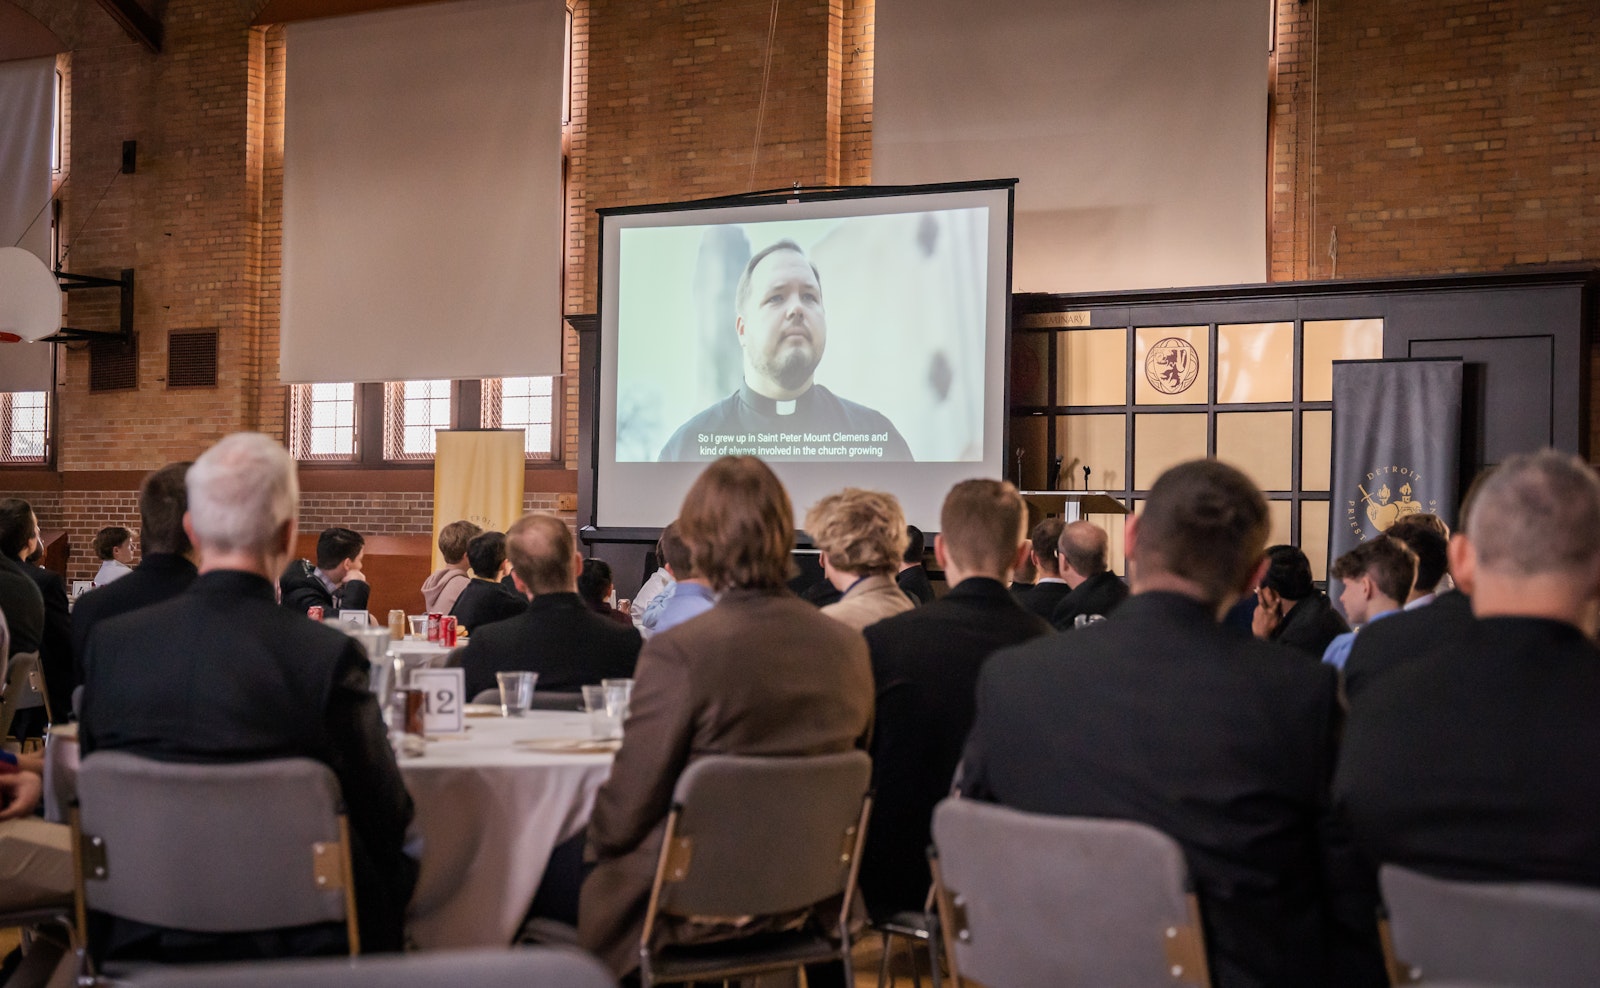 Discerners watch a video produced for the Office of Priestly Vocations during a discernment day at Sacred Heart Major Seminary in Detroit on March 28.